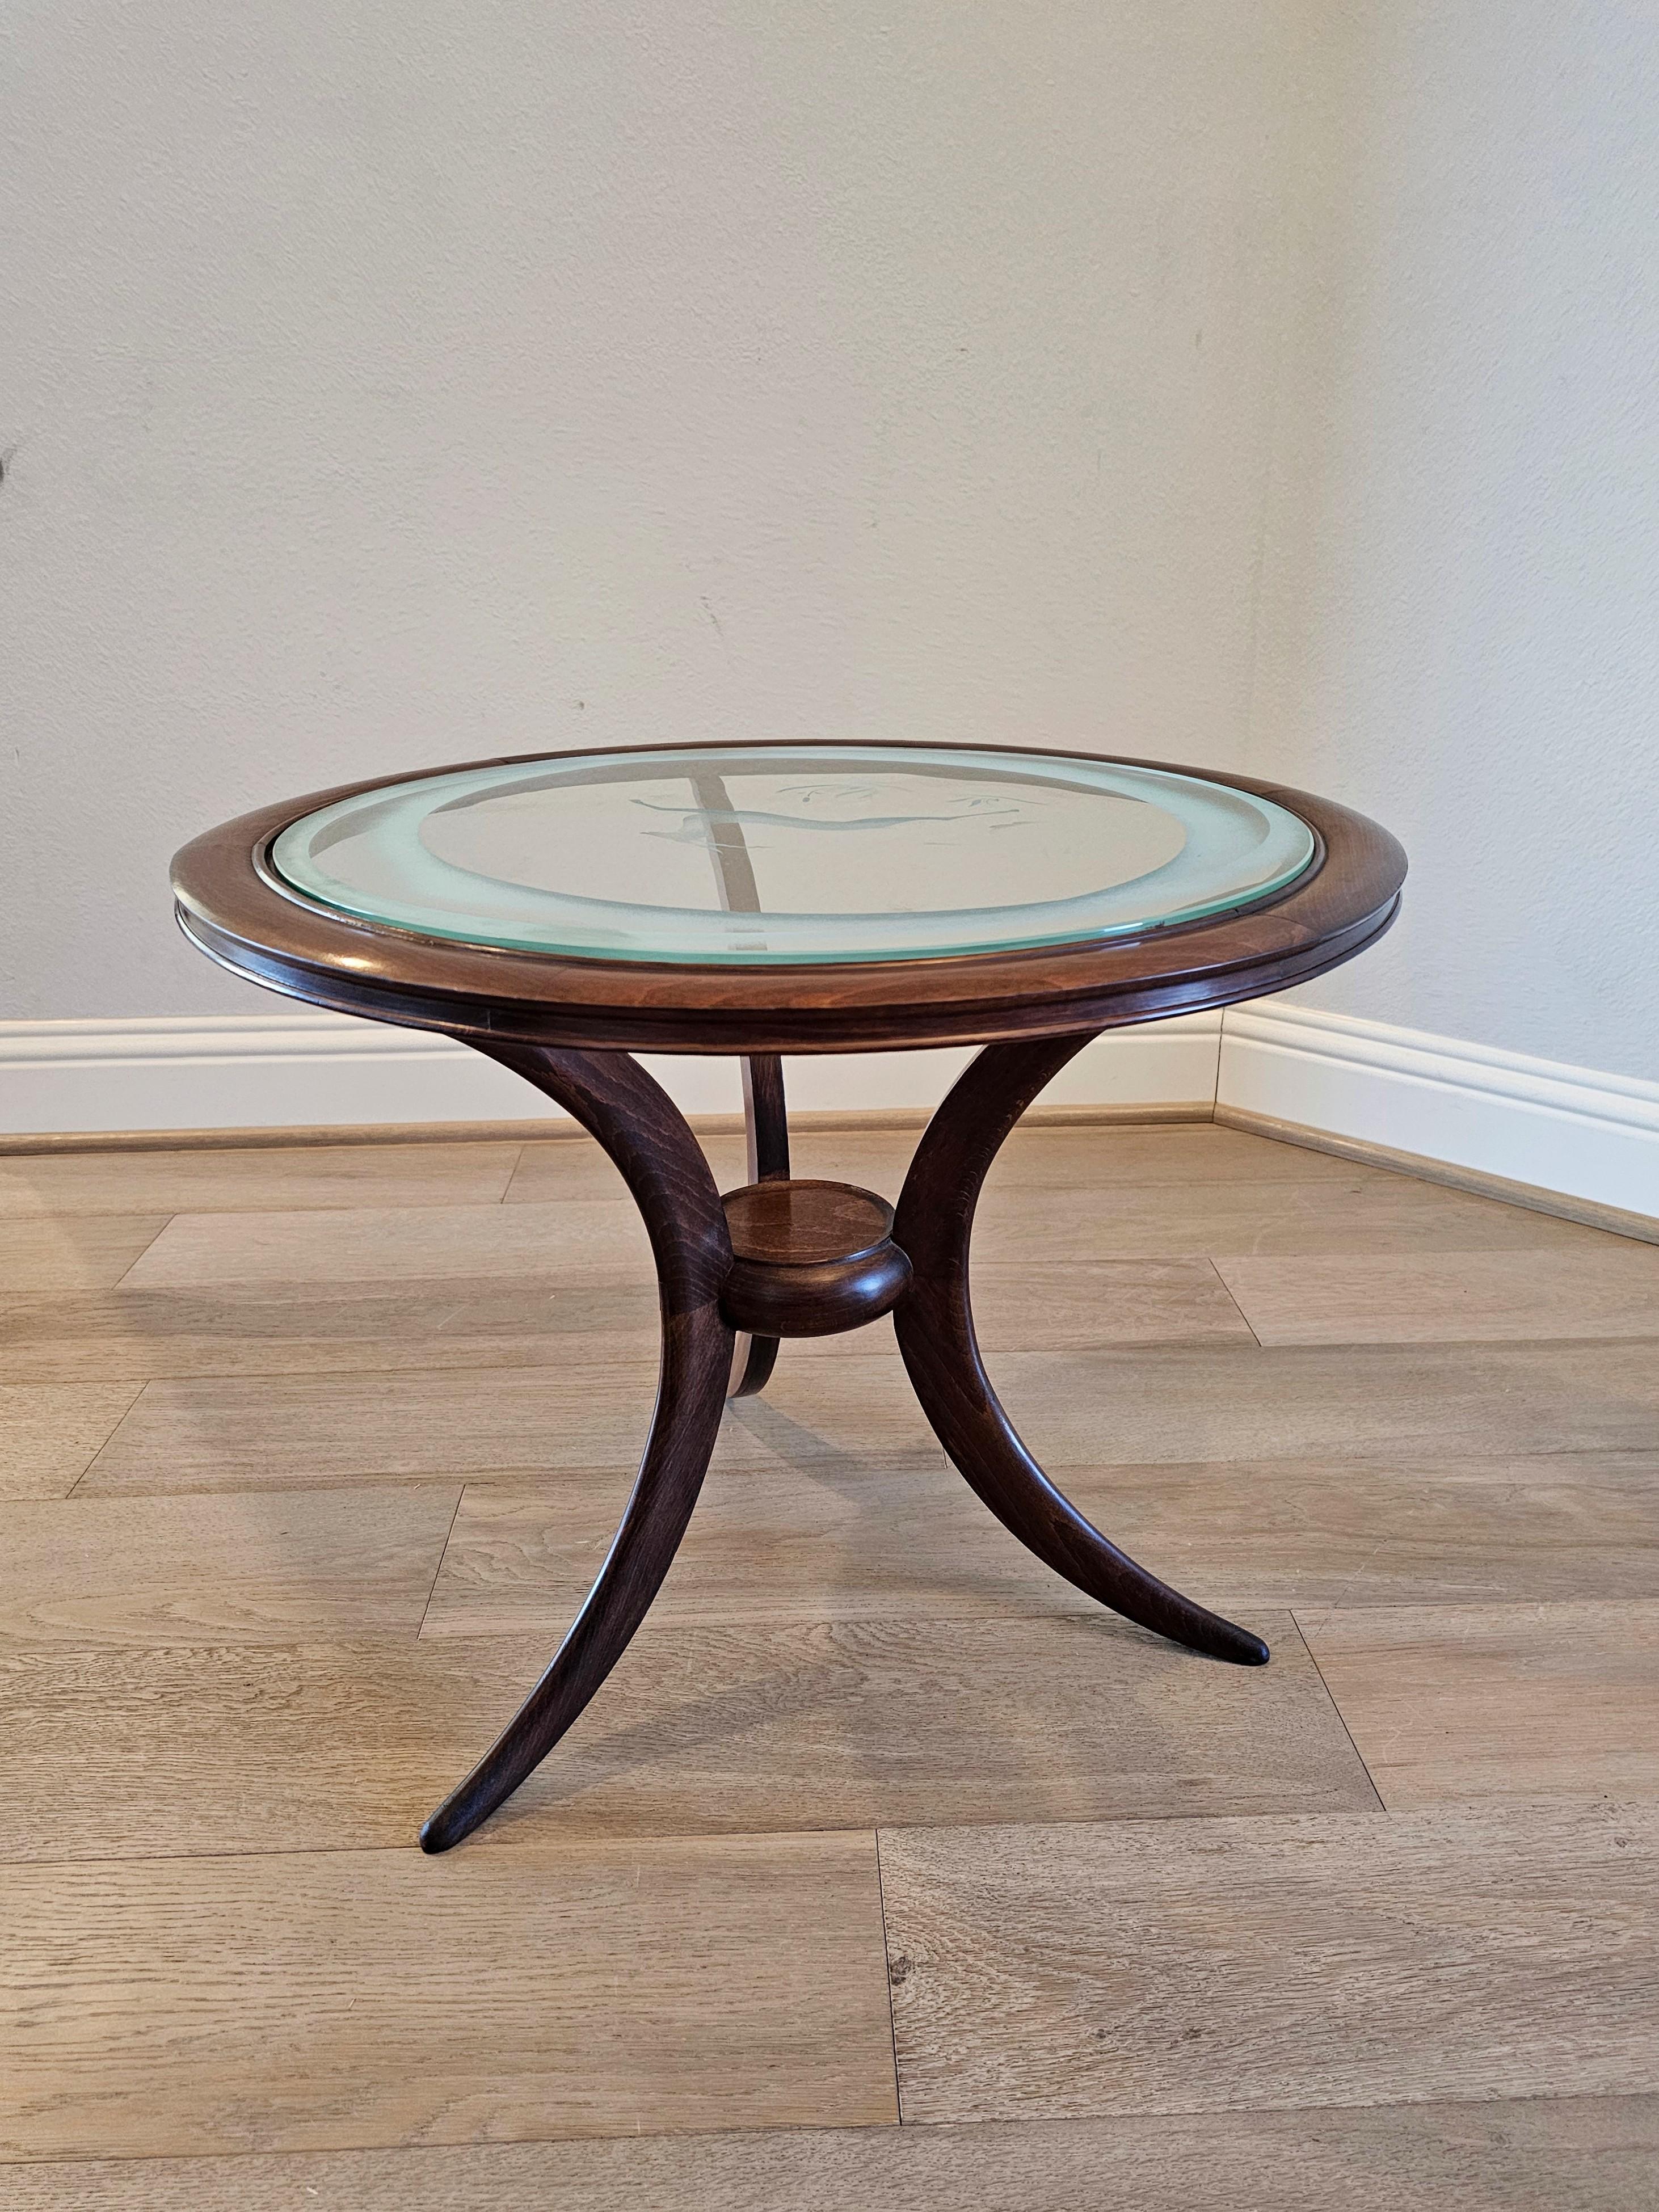 1940s Italian Mid-Century Modern Round Etched Glass Side Table  For Sale 4